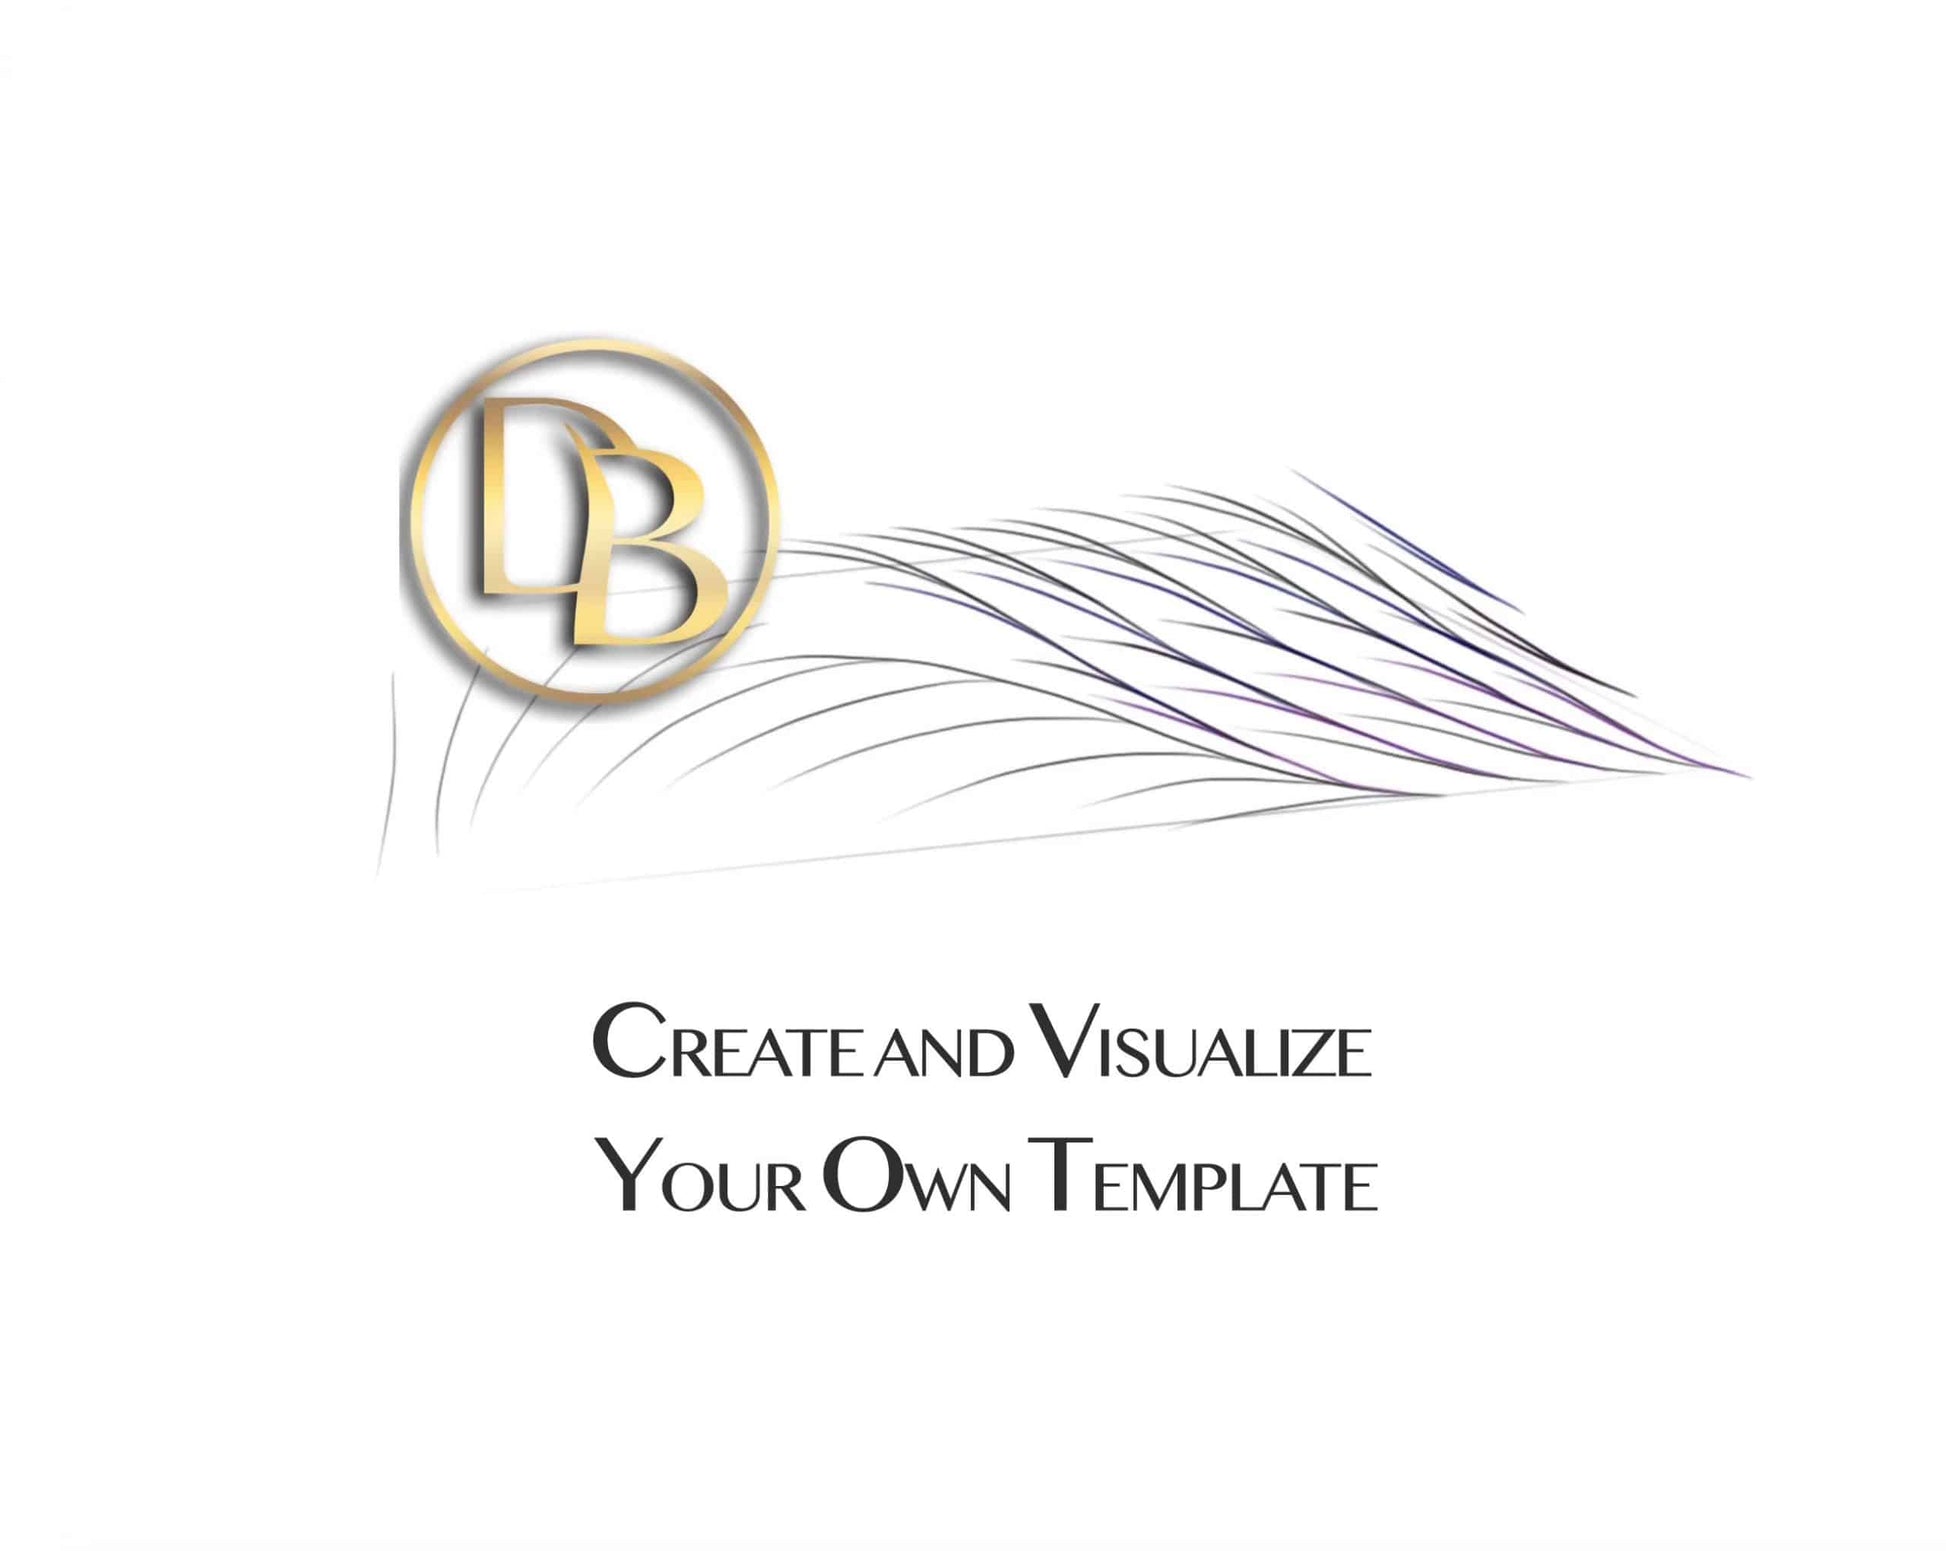 Your Template Visualization